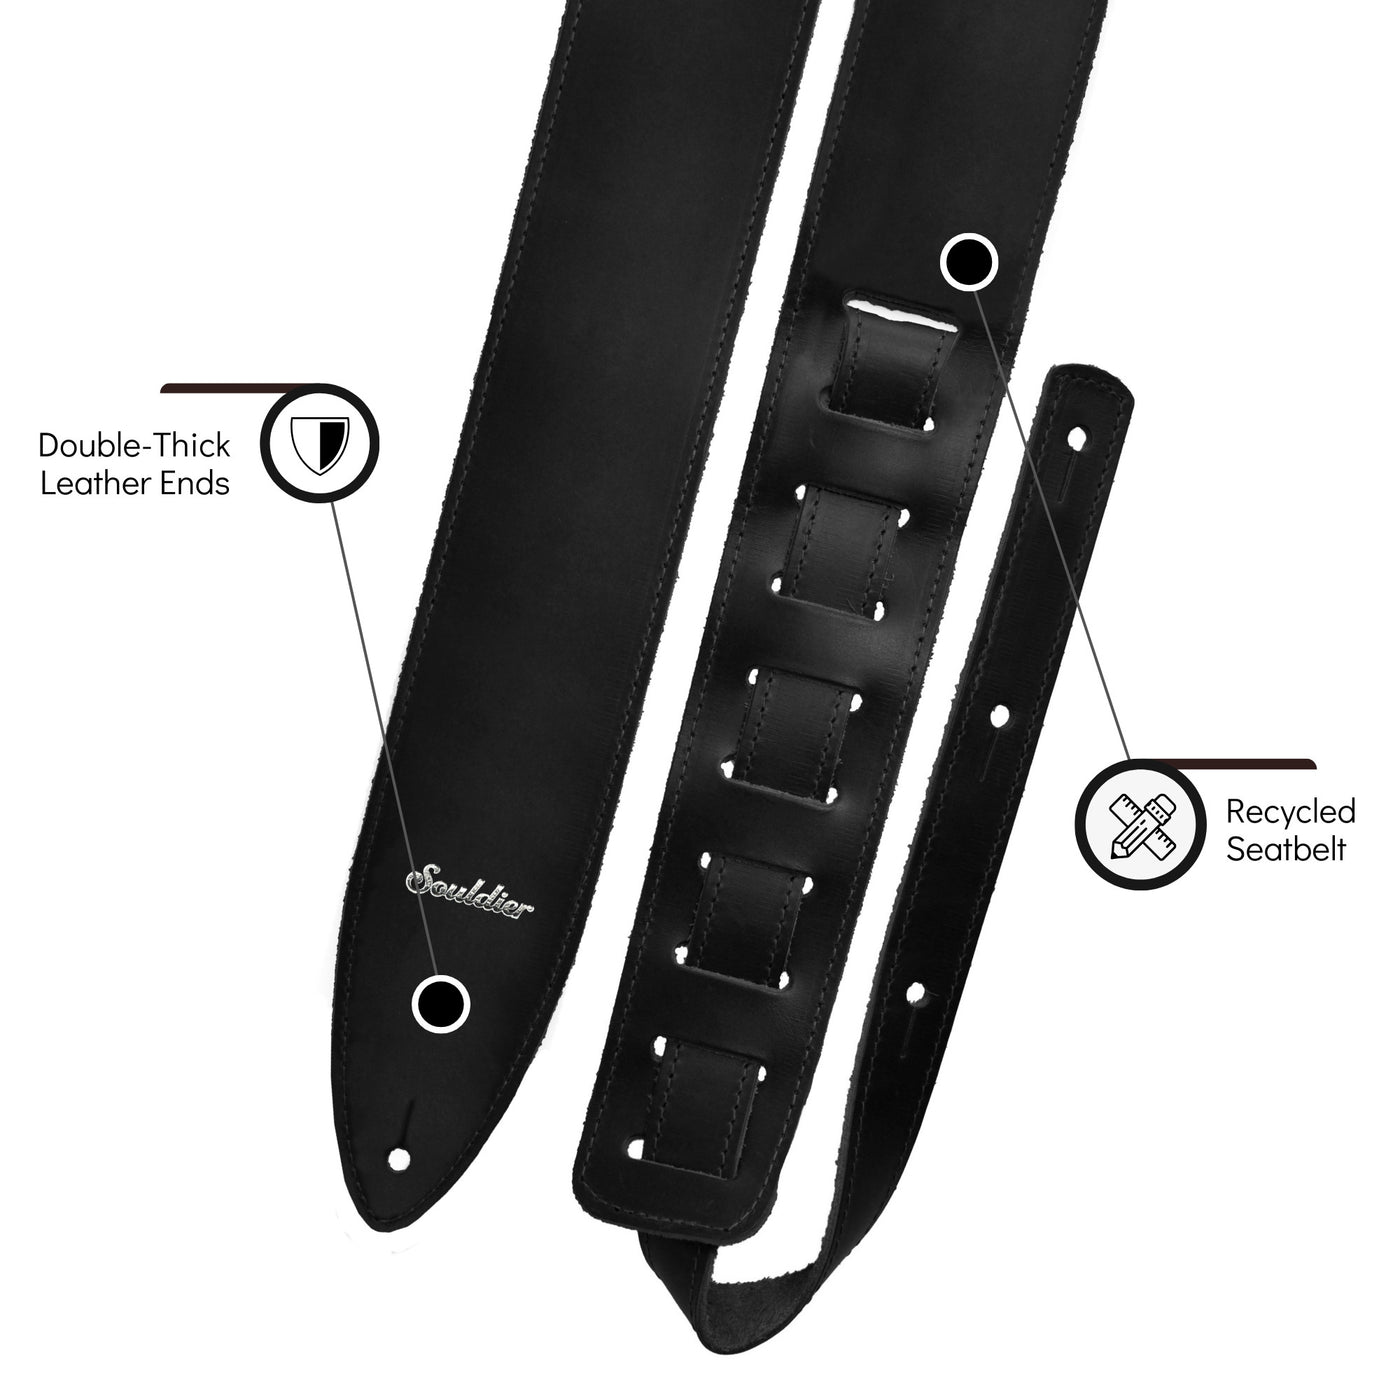 Souldier TGS0000BK02BK - Handmade Souldier Solid Torpedo Strap for Bass, Electric, or Acoustic Guitar, Adjustable Length from 42.5" to 55" Made in the USA, Black